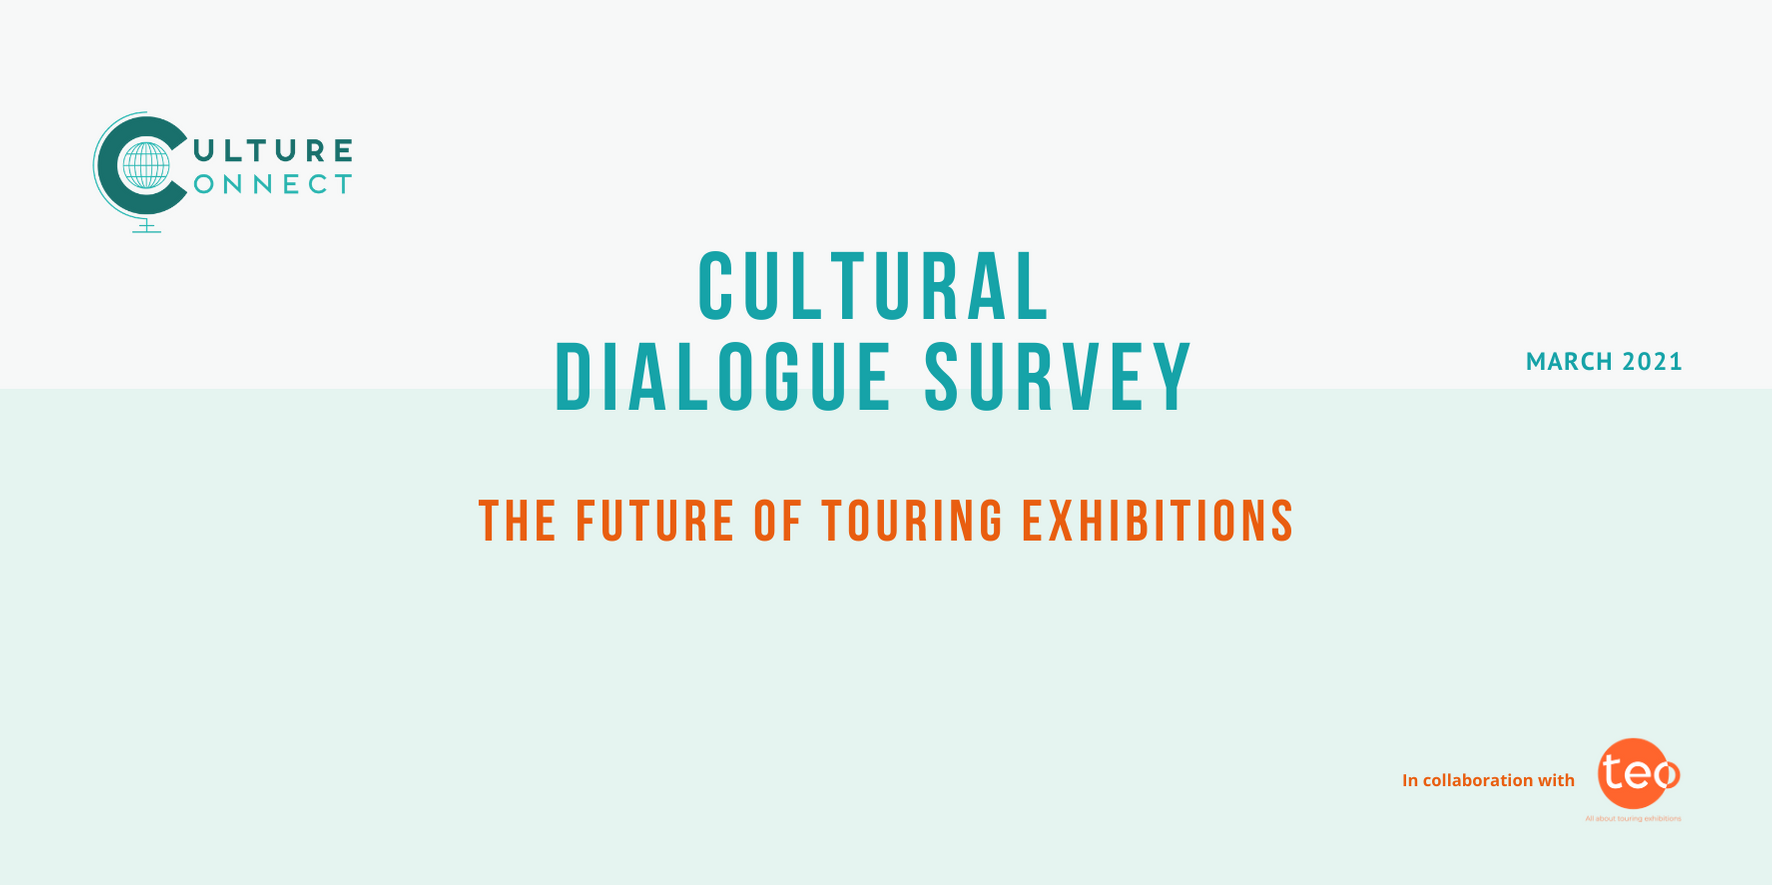 CC Cultural dialogue survey - Touring exhibitions - Image for Teo article